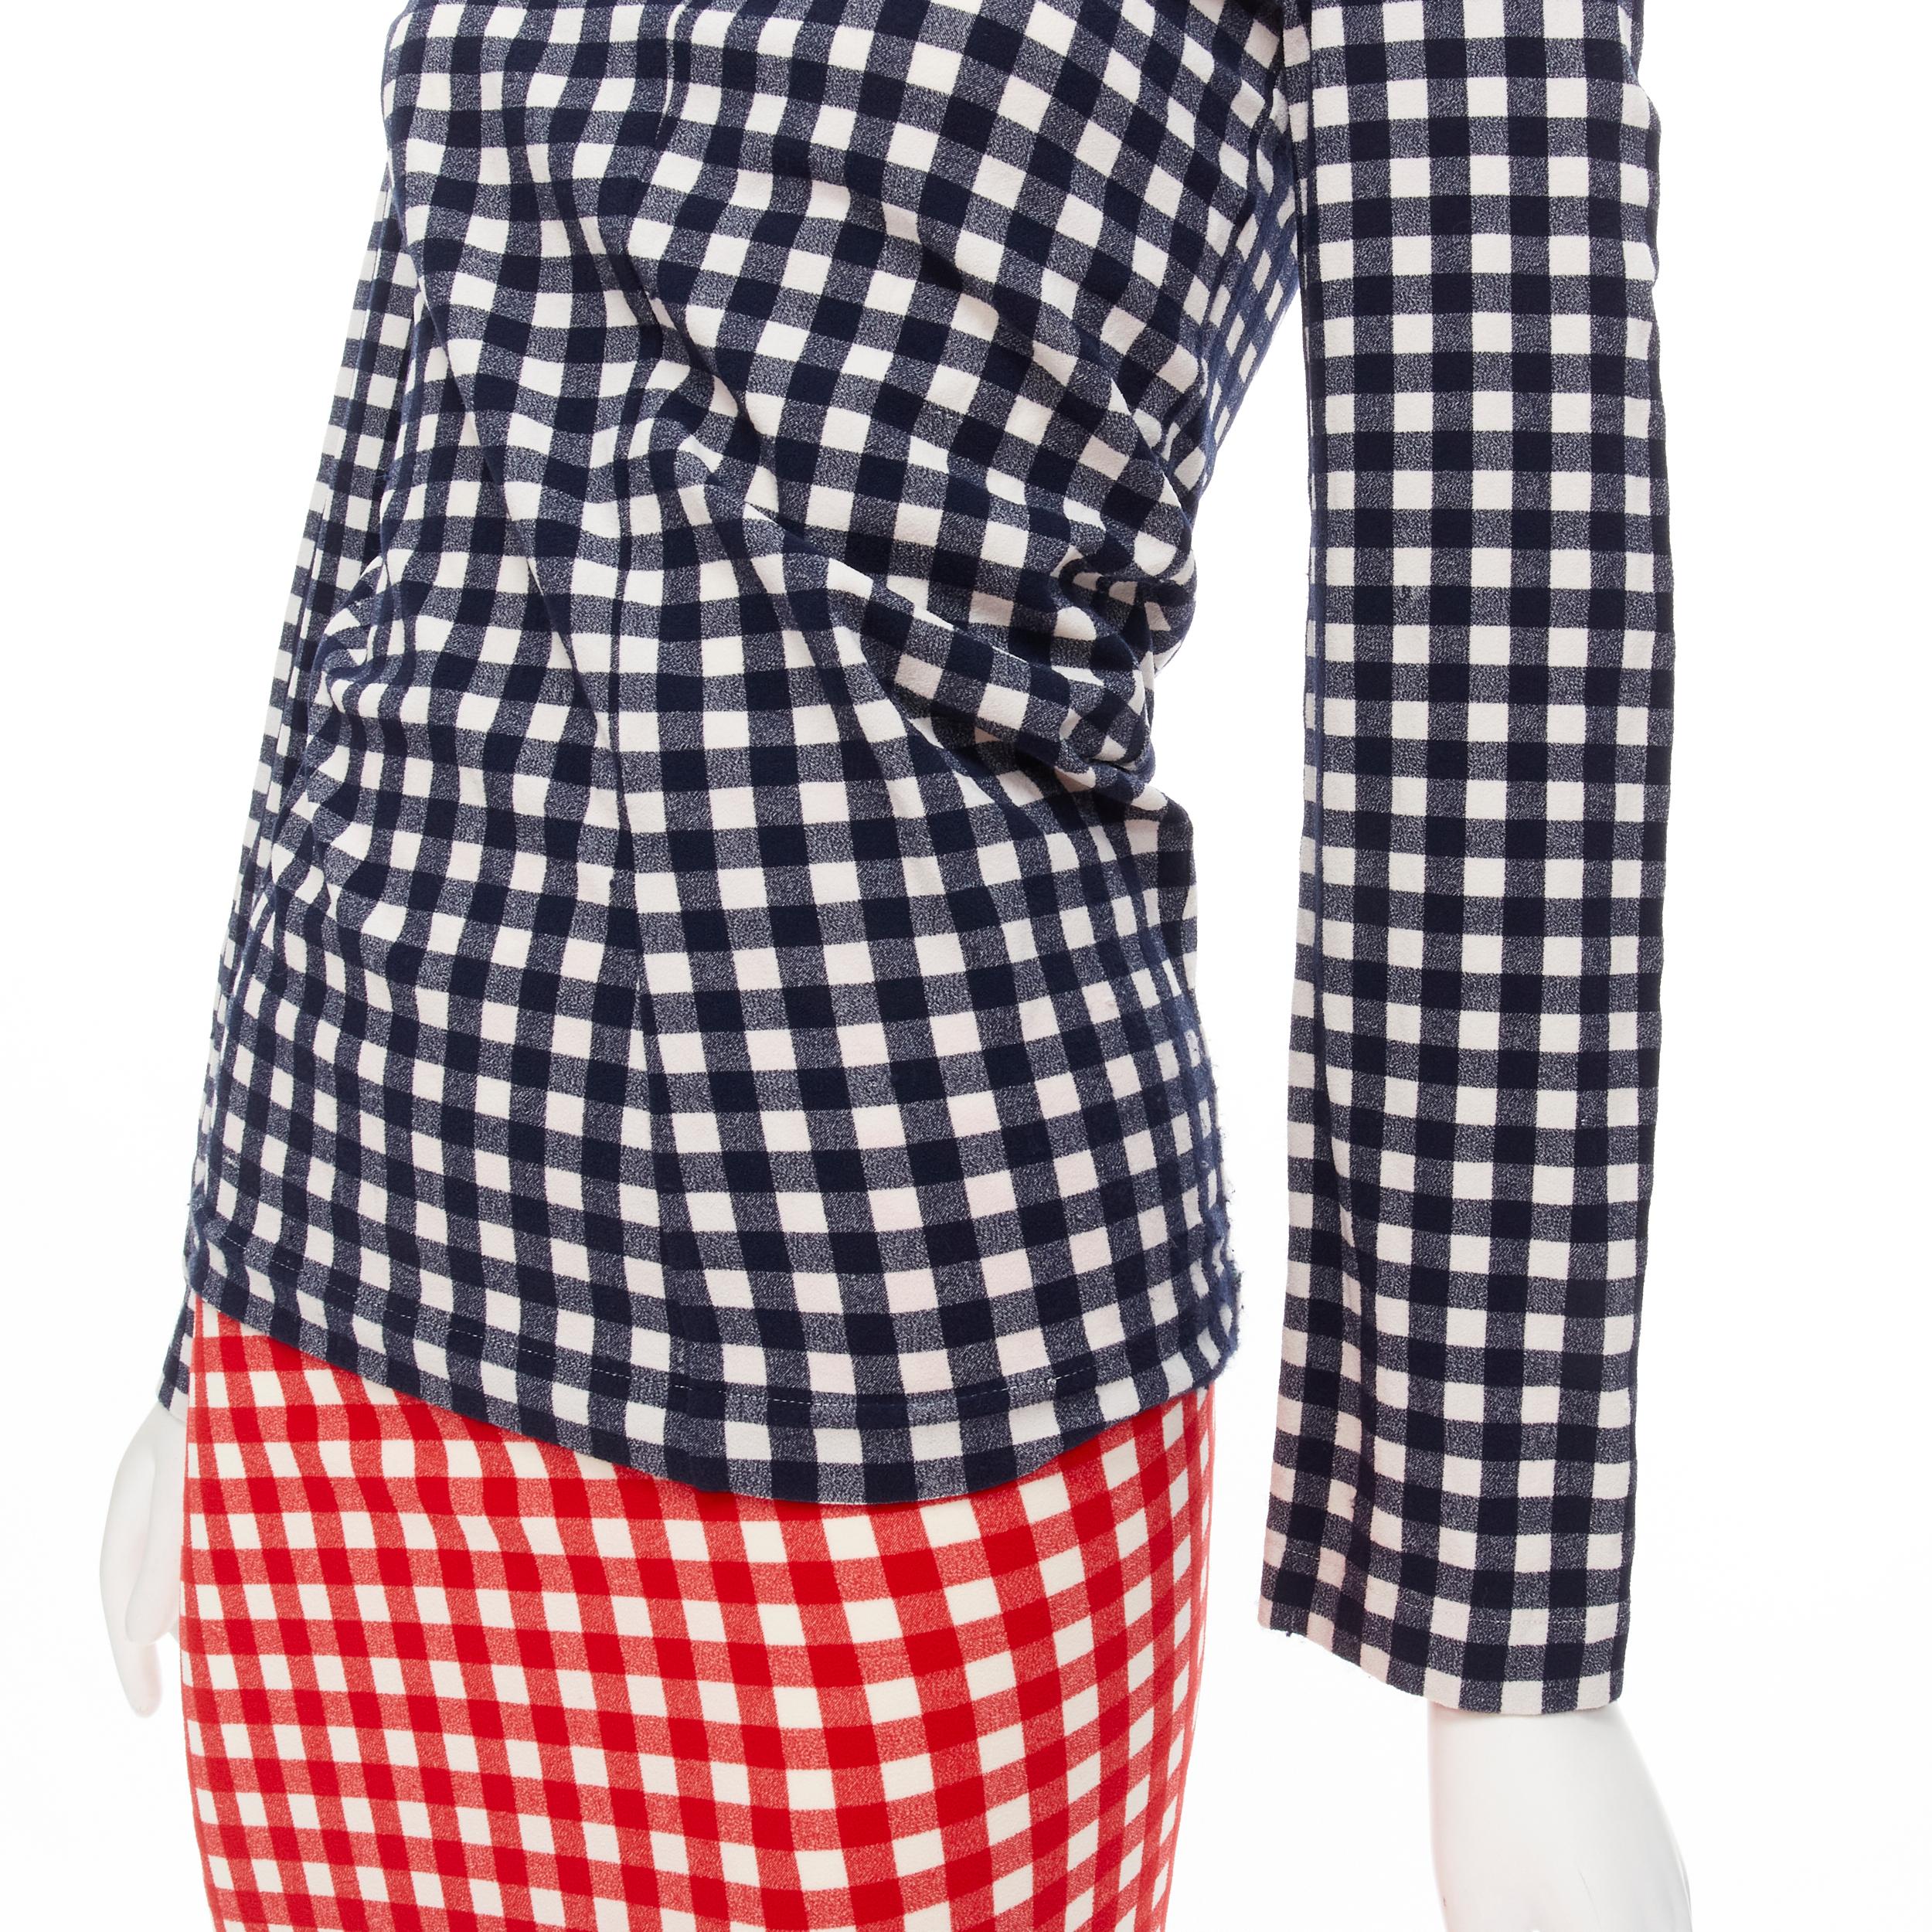 COMME DES GARCONS 1997 Vintage Lumps and Bumps gingham checked blue red set For Sale 2